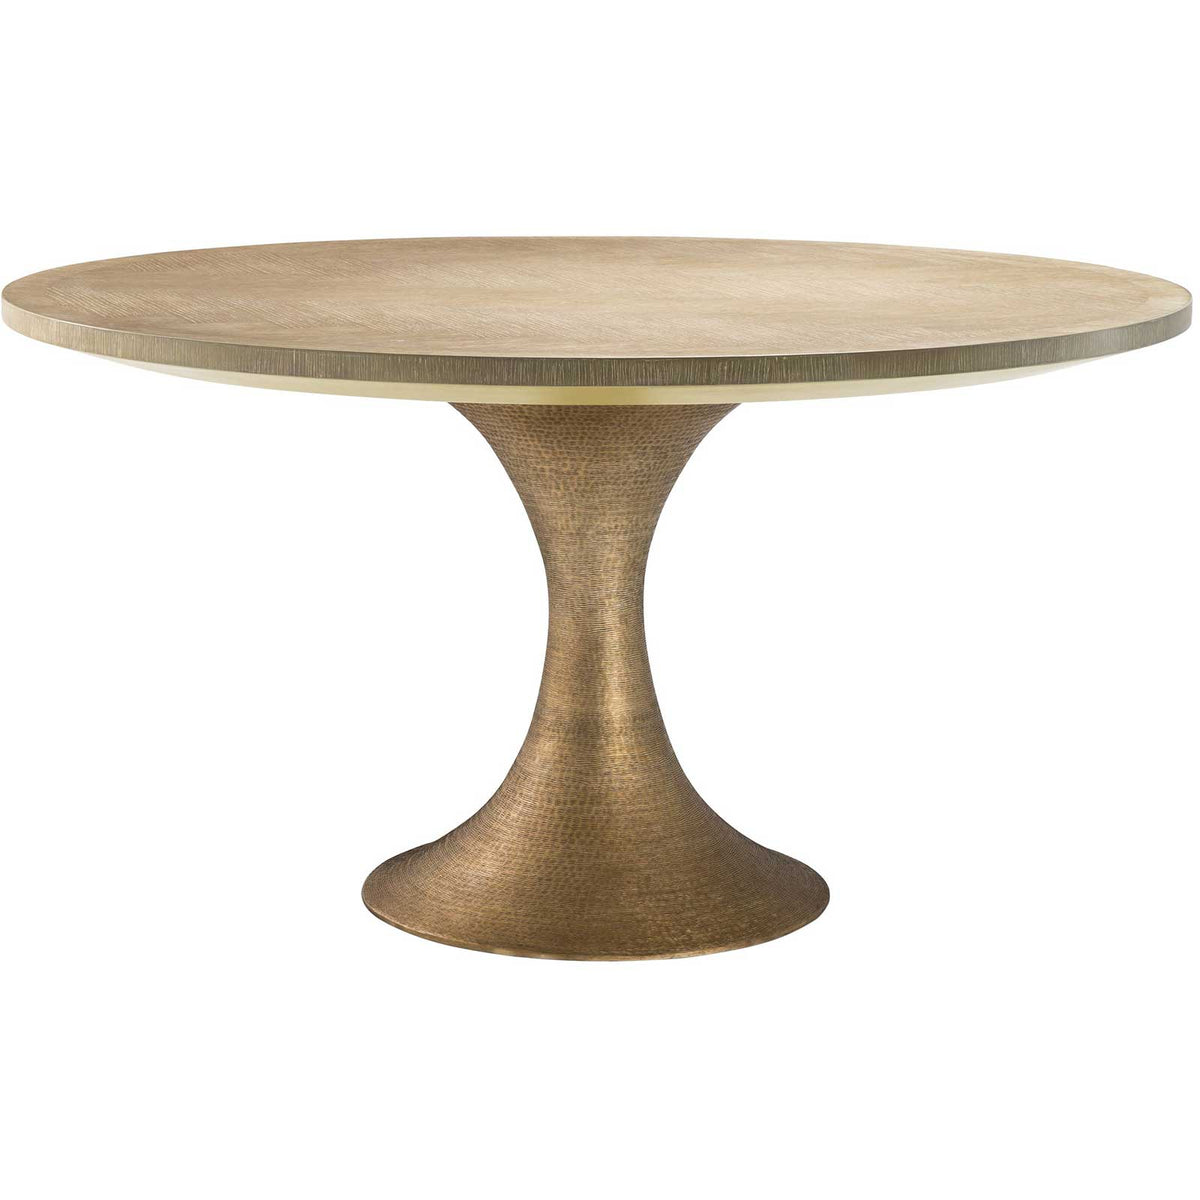 Melchior Round Dining Table, Washed Oak